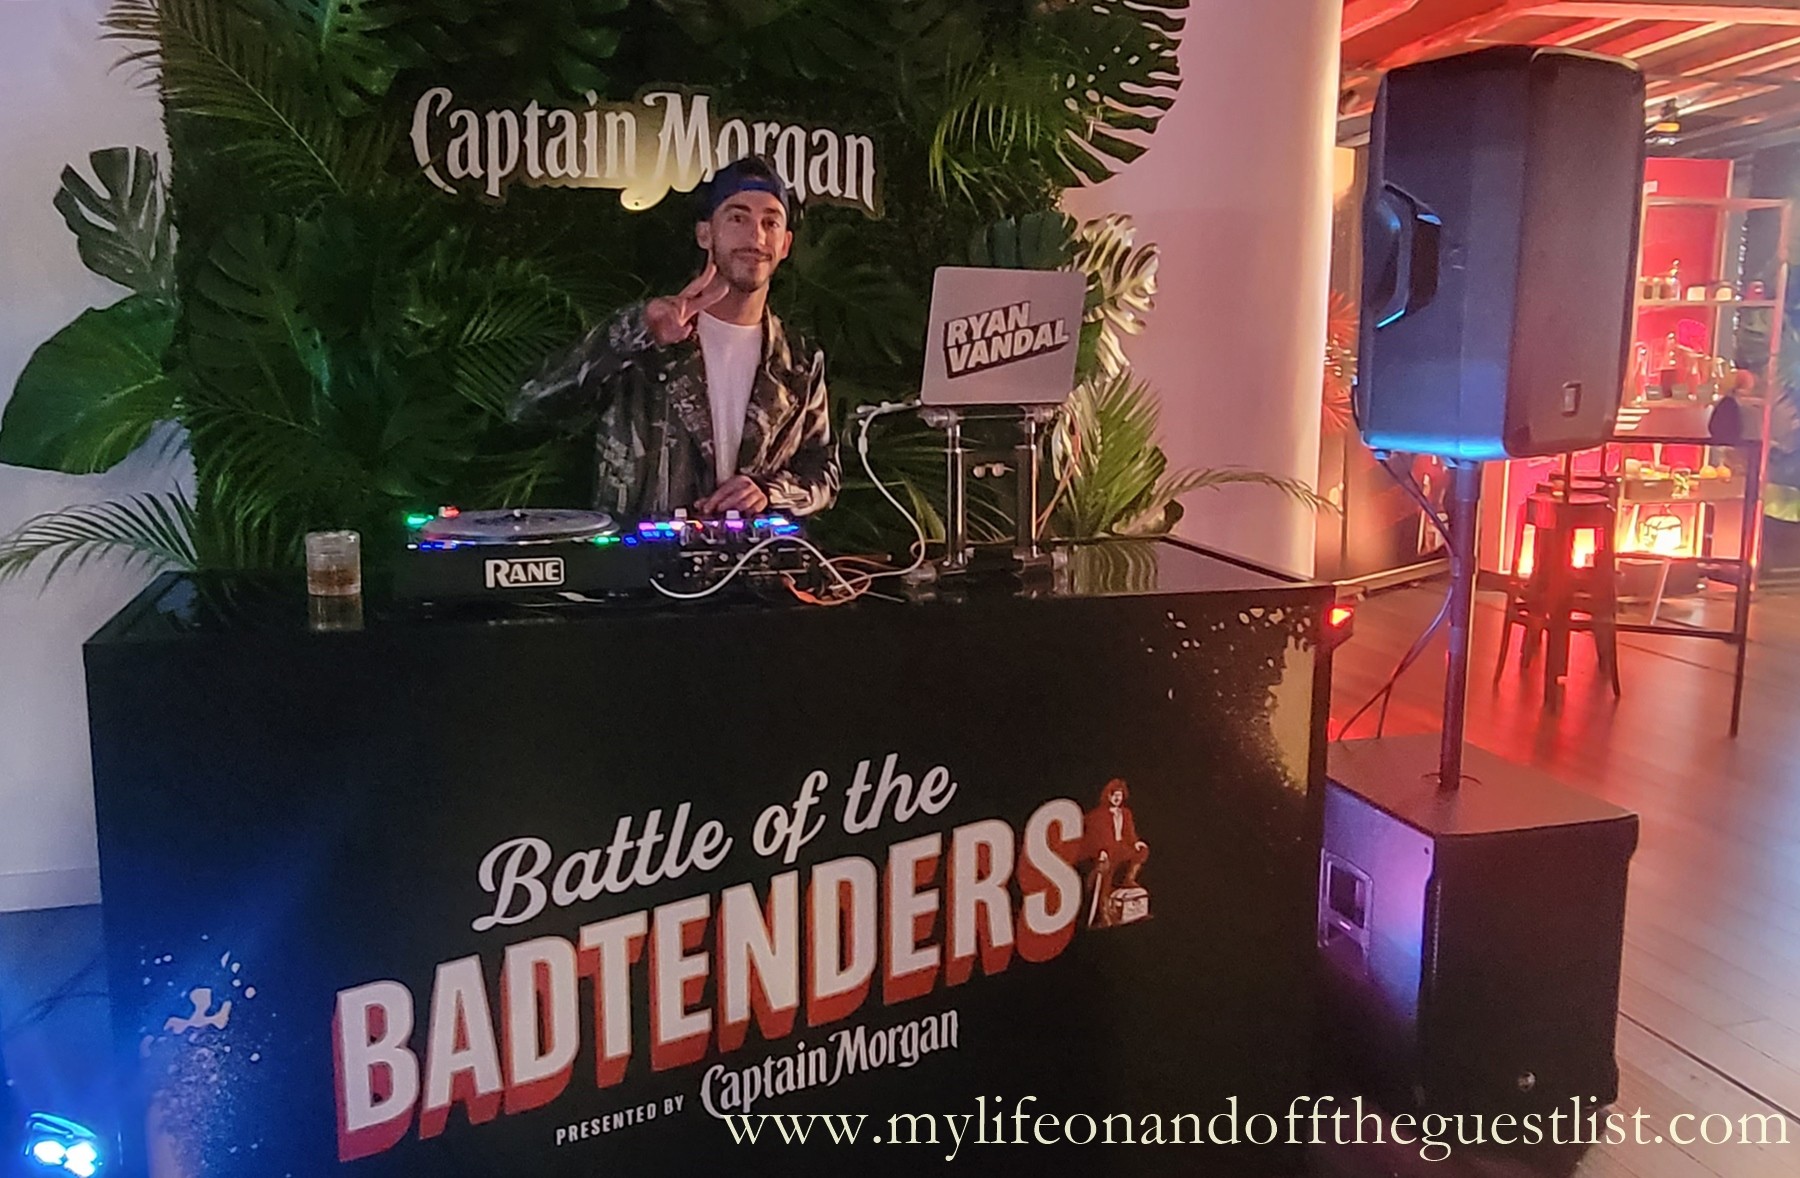 Captain Morgan Presents The Battle of the Badtenders